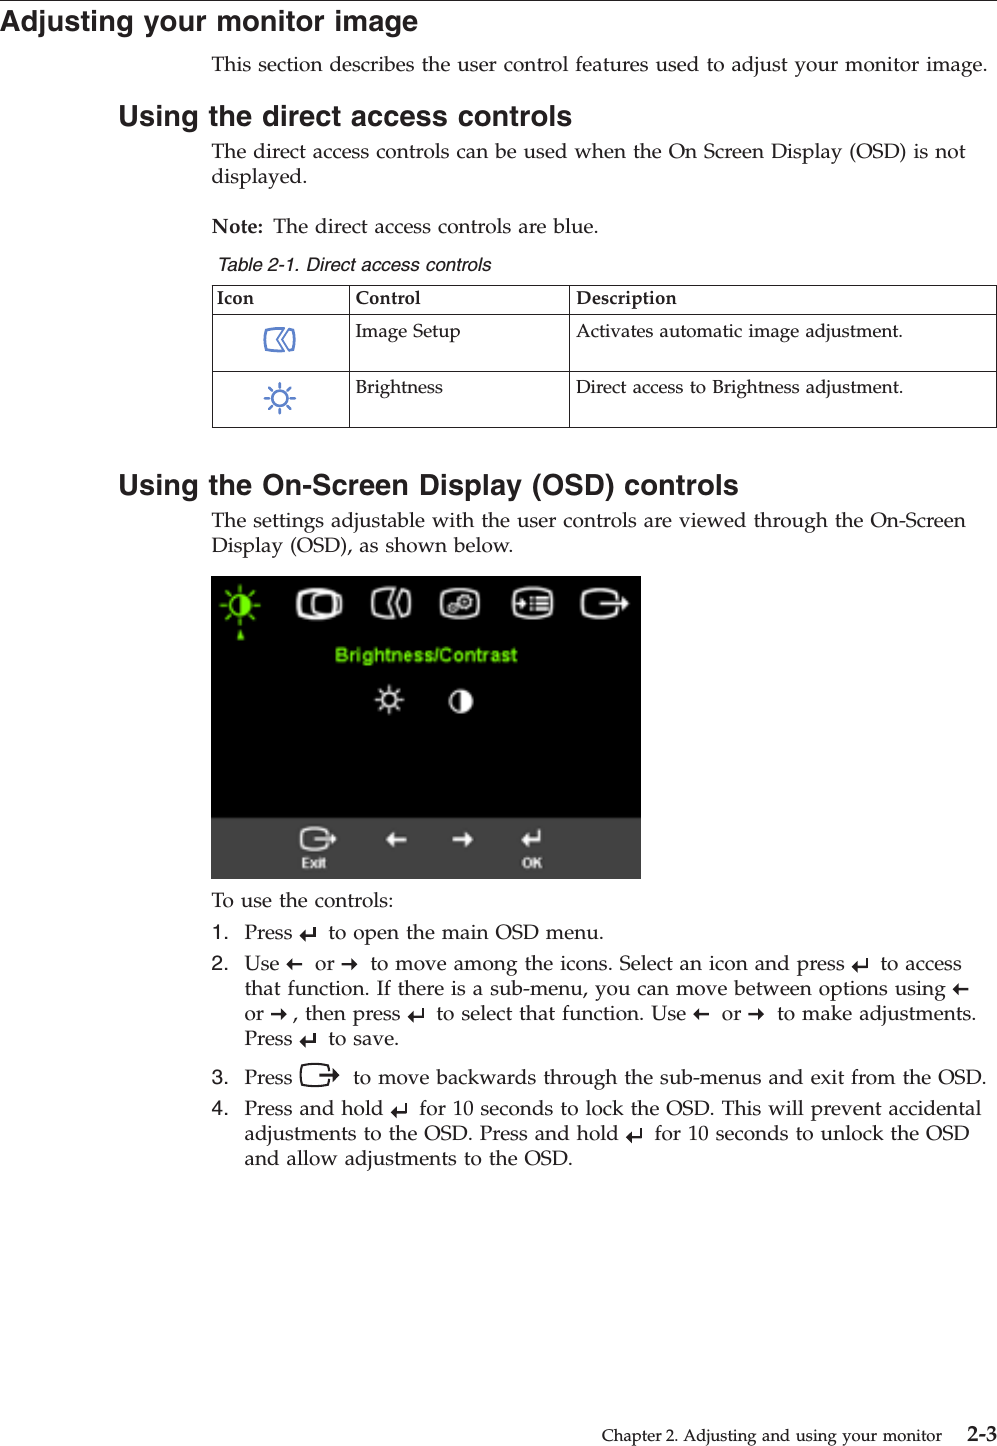 Adjusting your monitor image This section describes the user control features used to adjust your monitor image. Using the direct access controls The direct access controls can be used when the On Screen Display (OSD) is not displayed. Note: The direct access controls are blue. Table 2-1. Direct access controls Icon Control Description   Image Setup Activates automatic image adjustment.   Brightness Direct access to Brightness adjustment.  Using the On-Screen Display (OSD) controls The settings adjustable with the user controls are viewed through the On-Screen Display (OSD), as shown below.    To use the controls: 1.    Press     to open the main OSD menu. 2.    Use     or     to move among the icons. Select an icon and press     to access that function. If there is a sub-menu, you can move between options using    or    , then press     to select that function. Use     or     to make adjustments. Press     to save. 3.    Press    to move backwards through the sub-menus and exit from the OSD. 4.    Press and hold     for 10 seconds to lock the OSD. This will prevent accidental adjustments to the OSD. Press and hold     for 10 seconds to unlock the OSD and allow adjustments to the OSD. Chapter 2. Adjusting and using your monitor 2-3